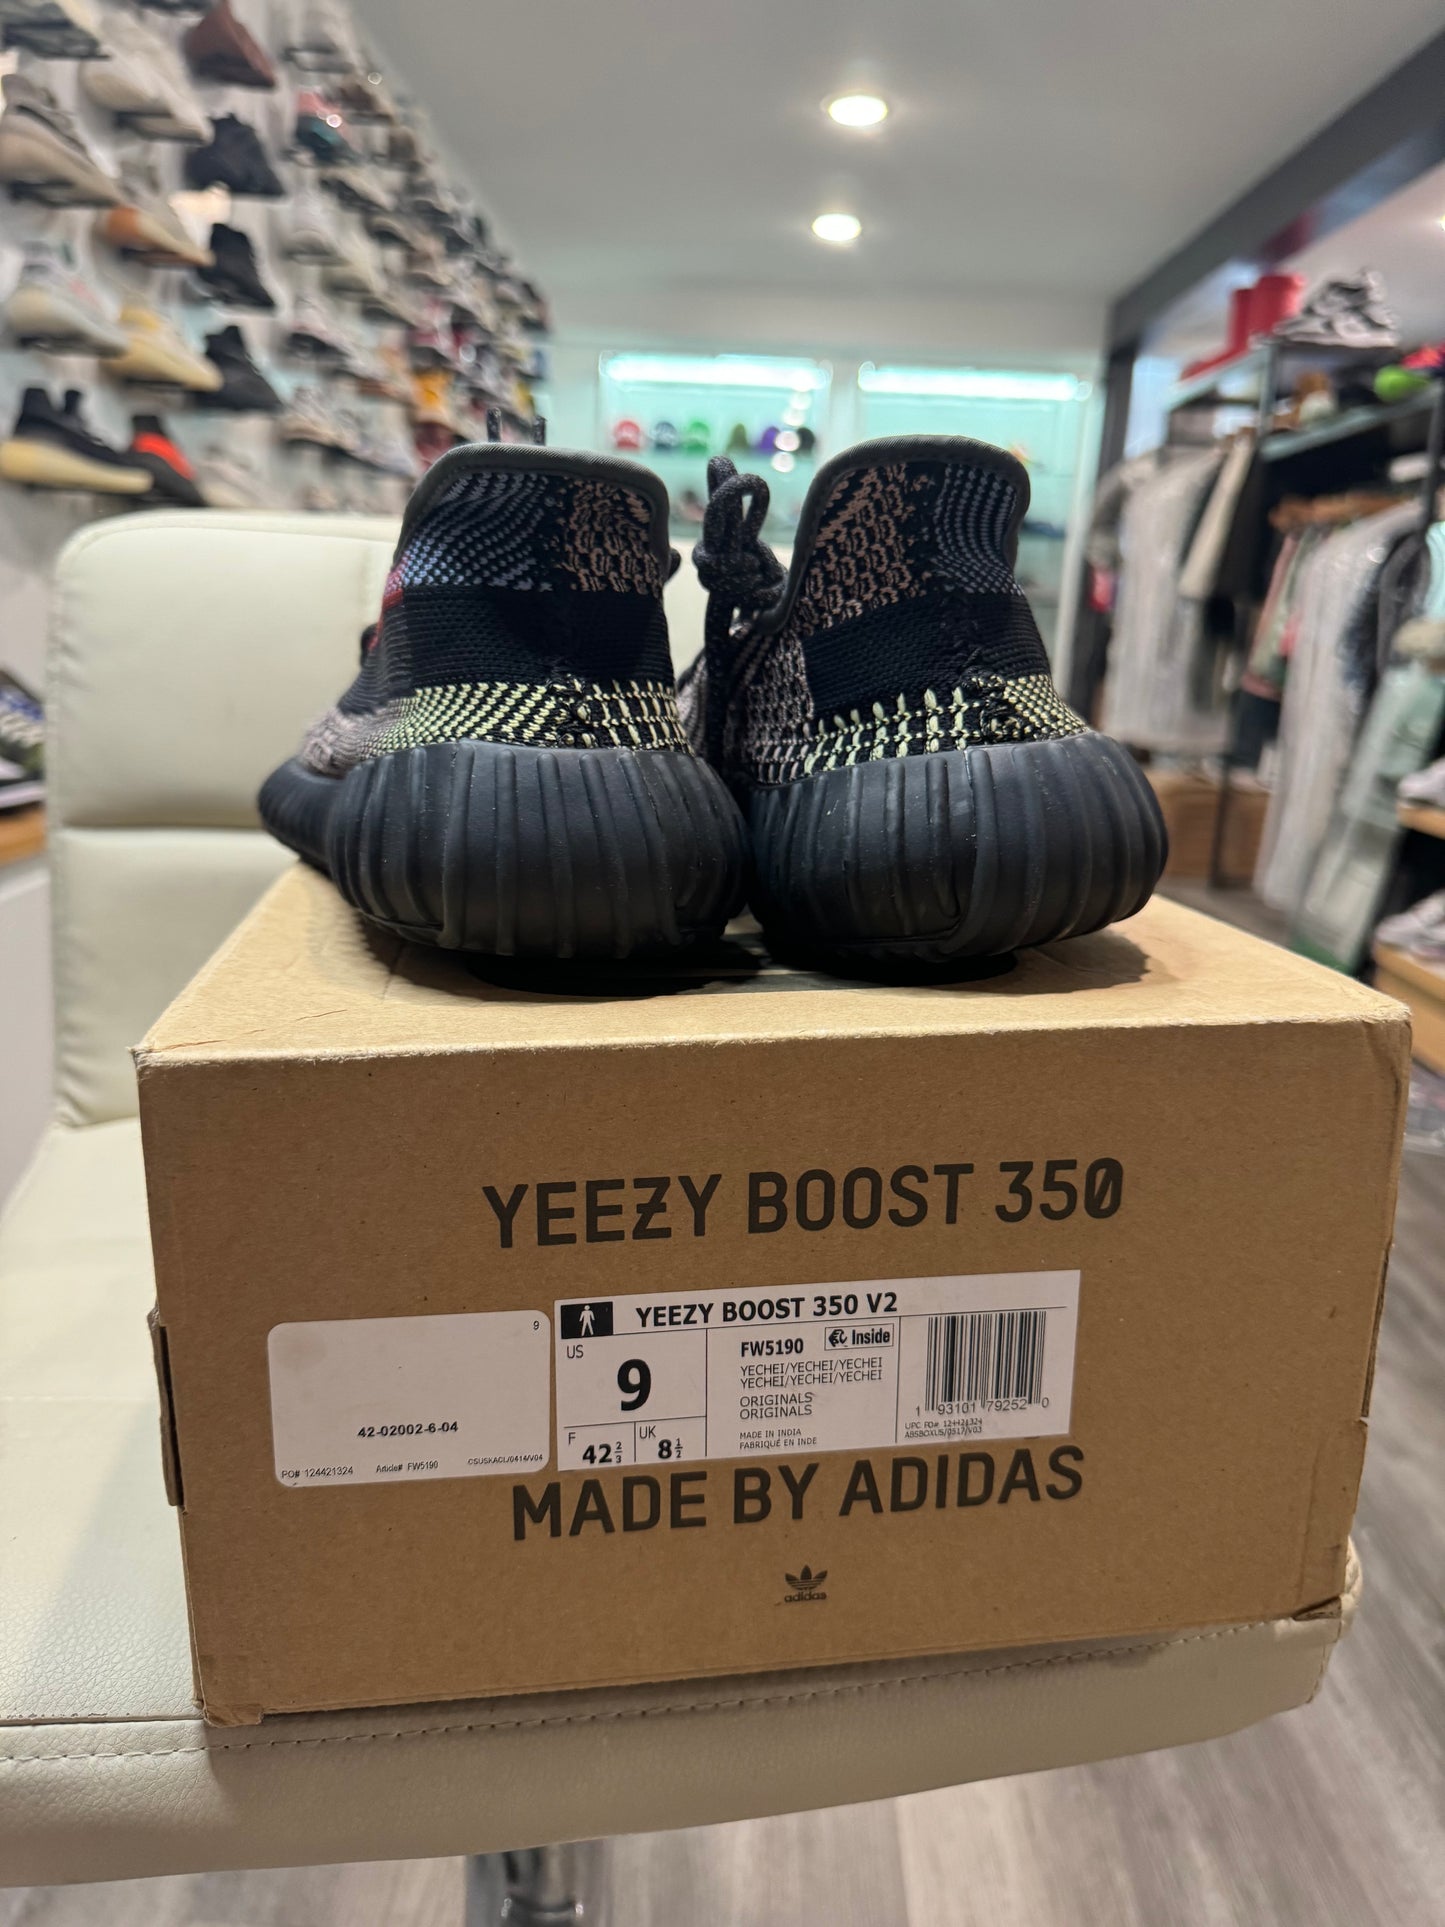 Yeezy Boost 350 V2 Yecheil Non-Reflective FW5190 USED SIZE 9M